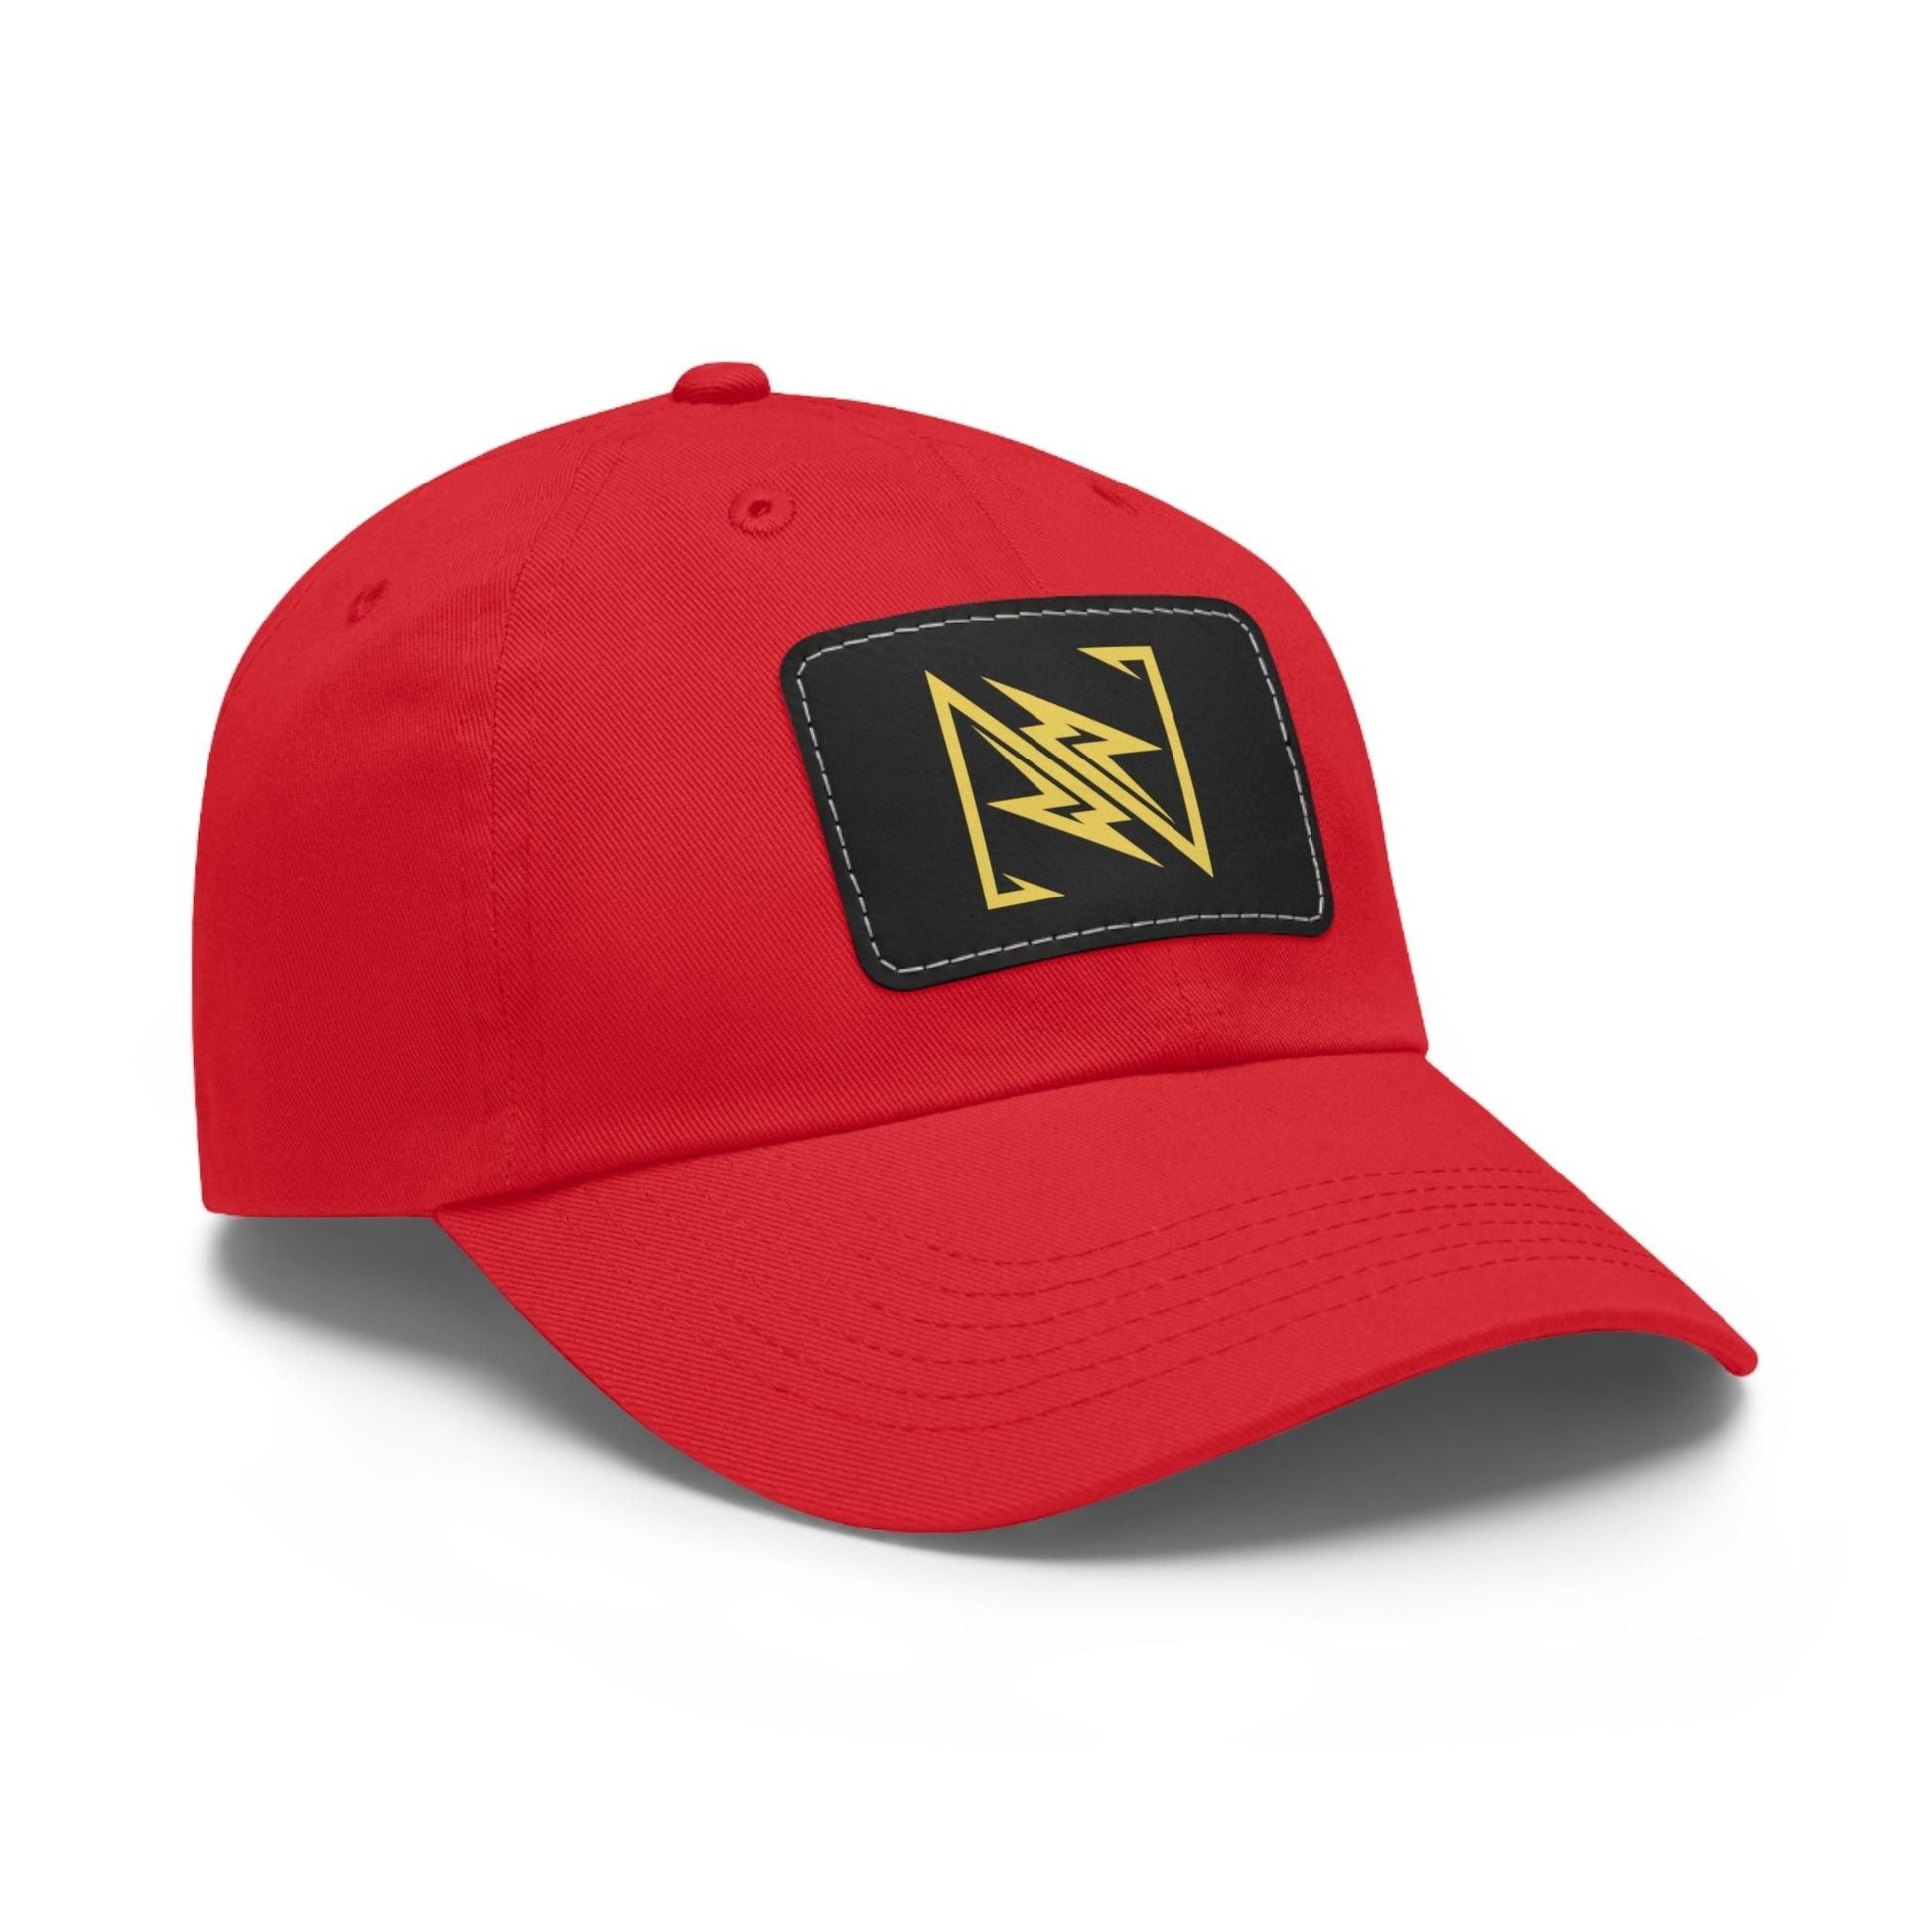 NX Vogue Premium Baseball Hat with Leather Patch Cap   